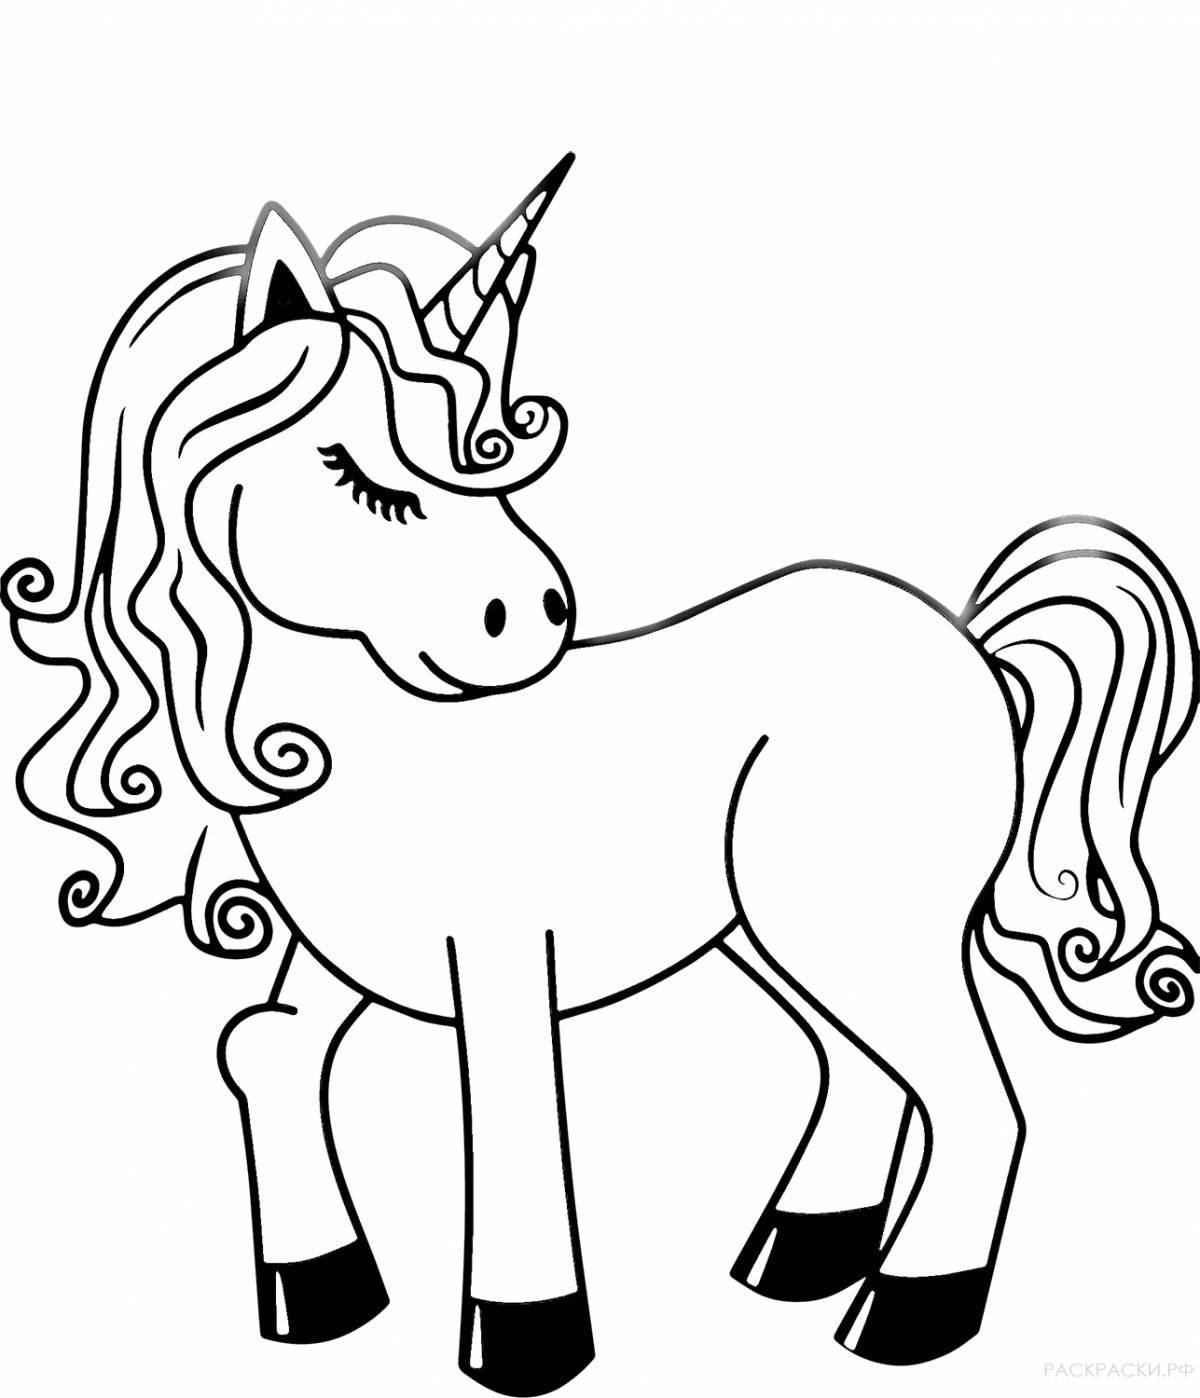 Live coloring unicorn for 5 year old girls